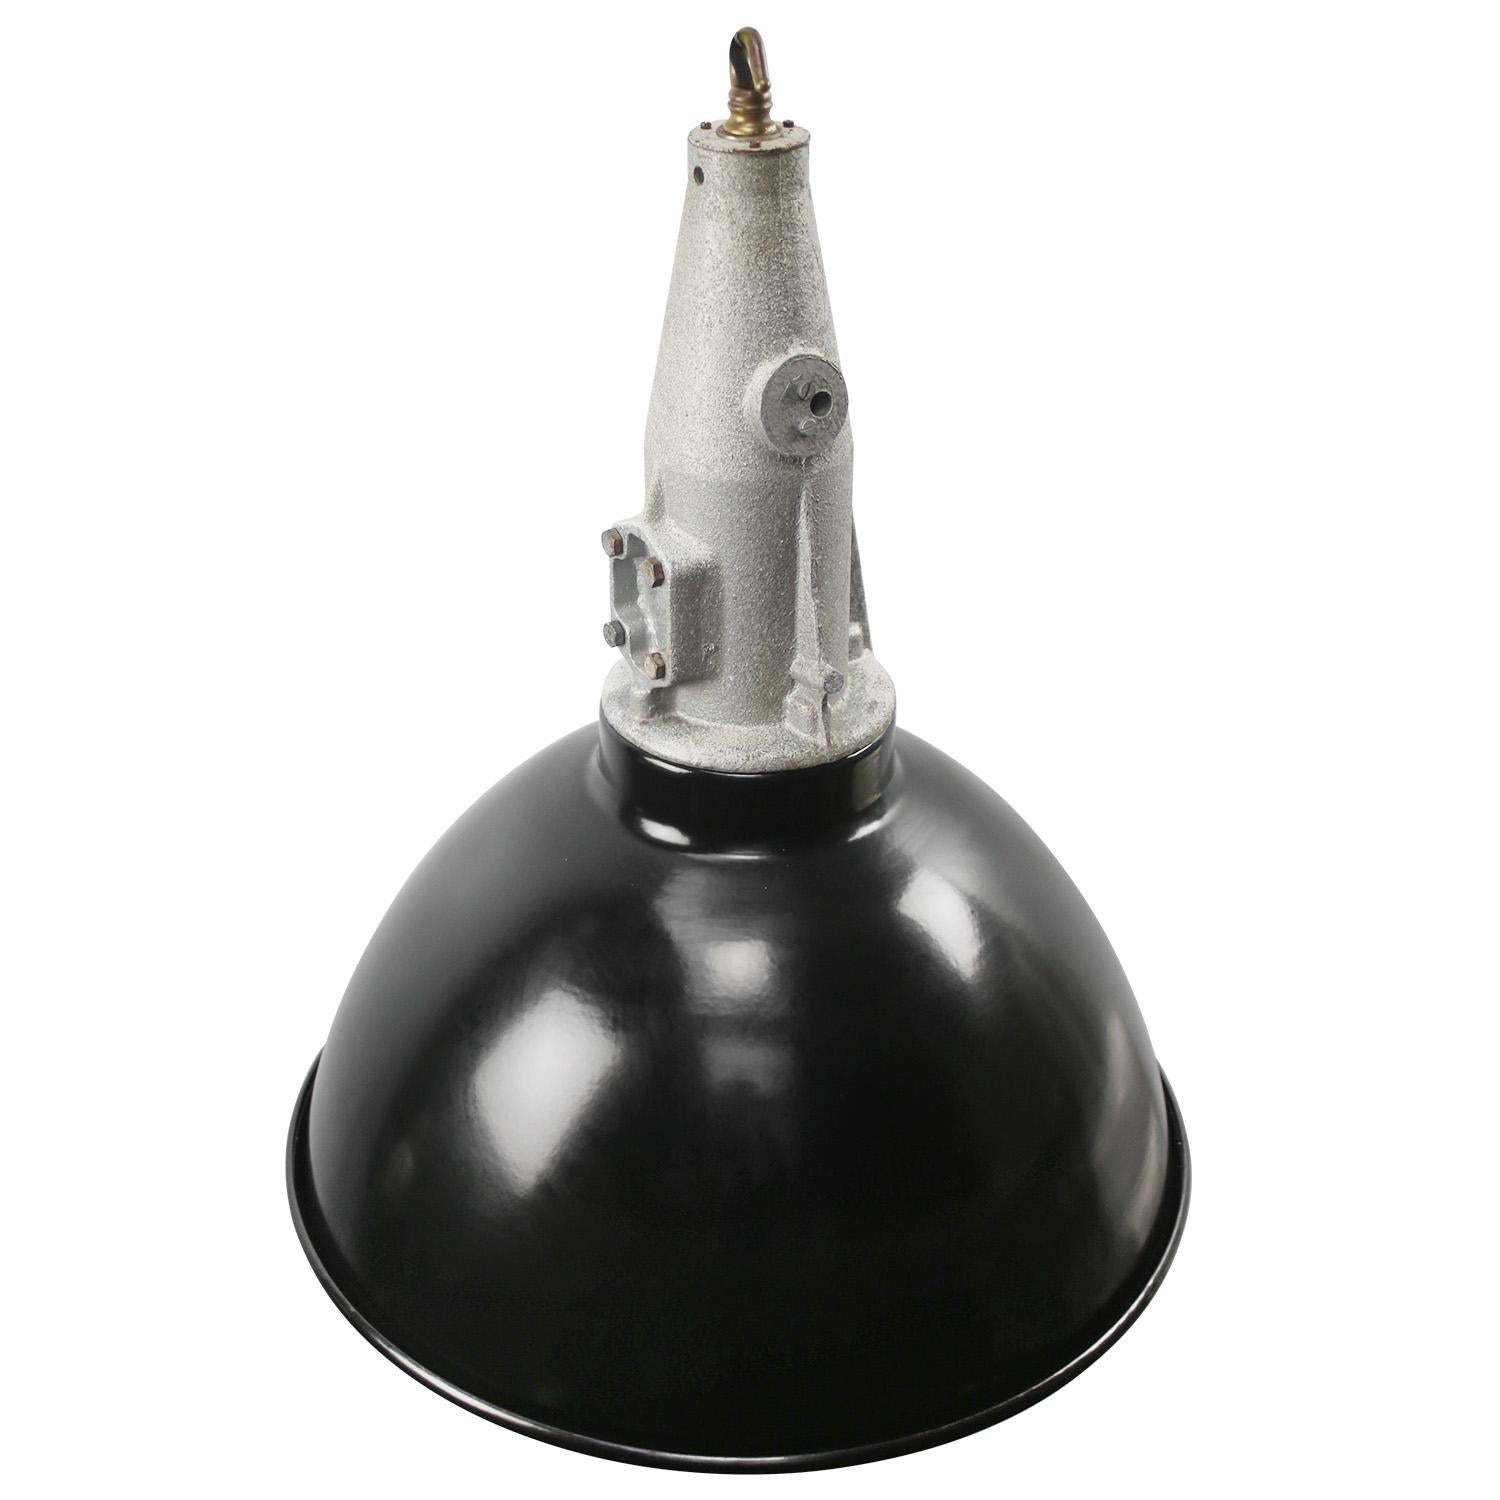 Vintage industrial pendant.
Black enamel shade with white interior
Cast aluminum top

Weight: 4.60 kg / 10.1 lb

Priced per individual item. All lamps have been made suitable by international standards for incandescent light bulbs, energy-efficient